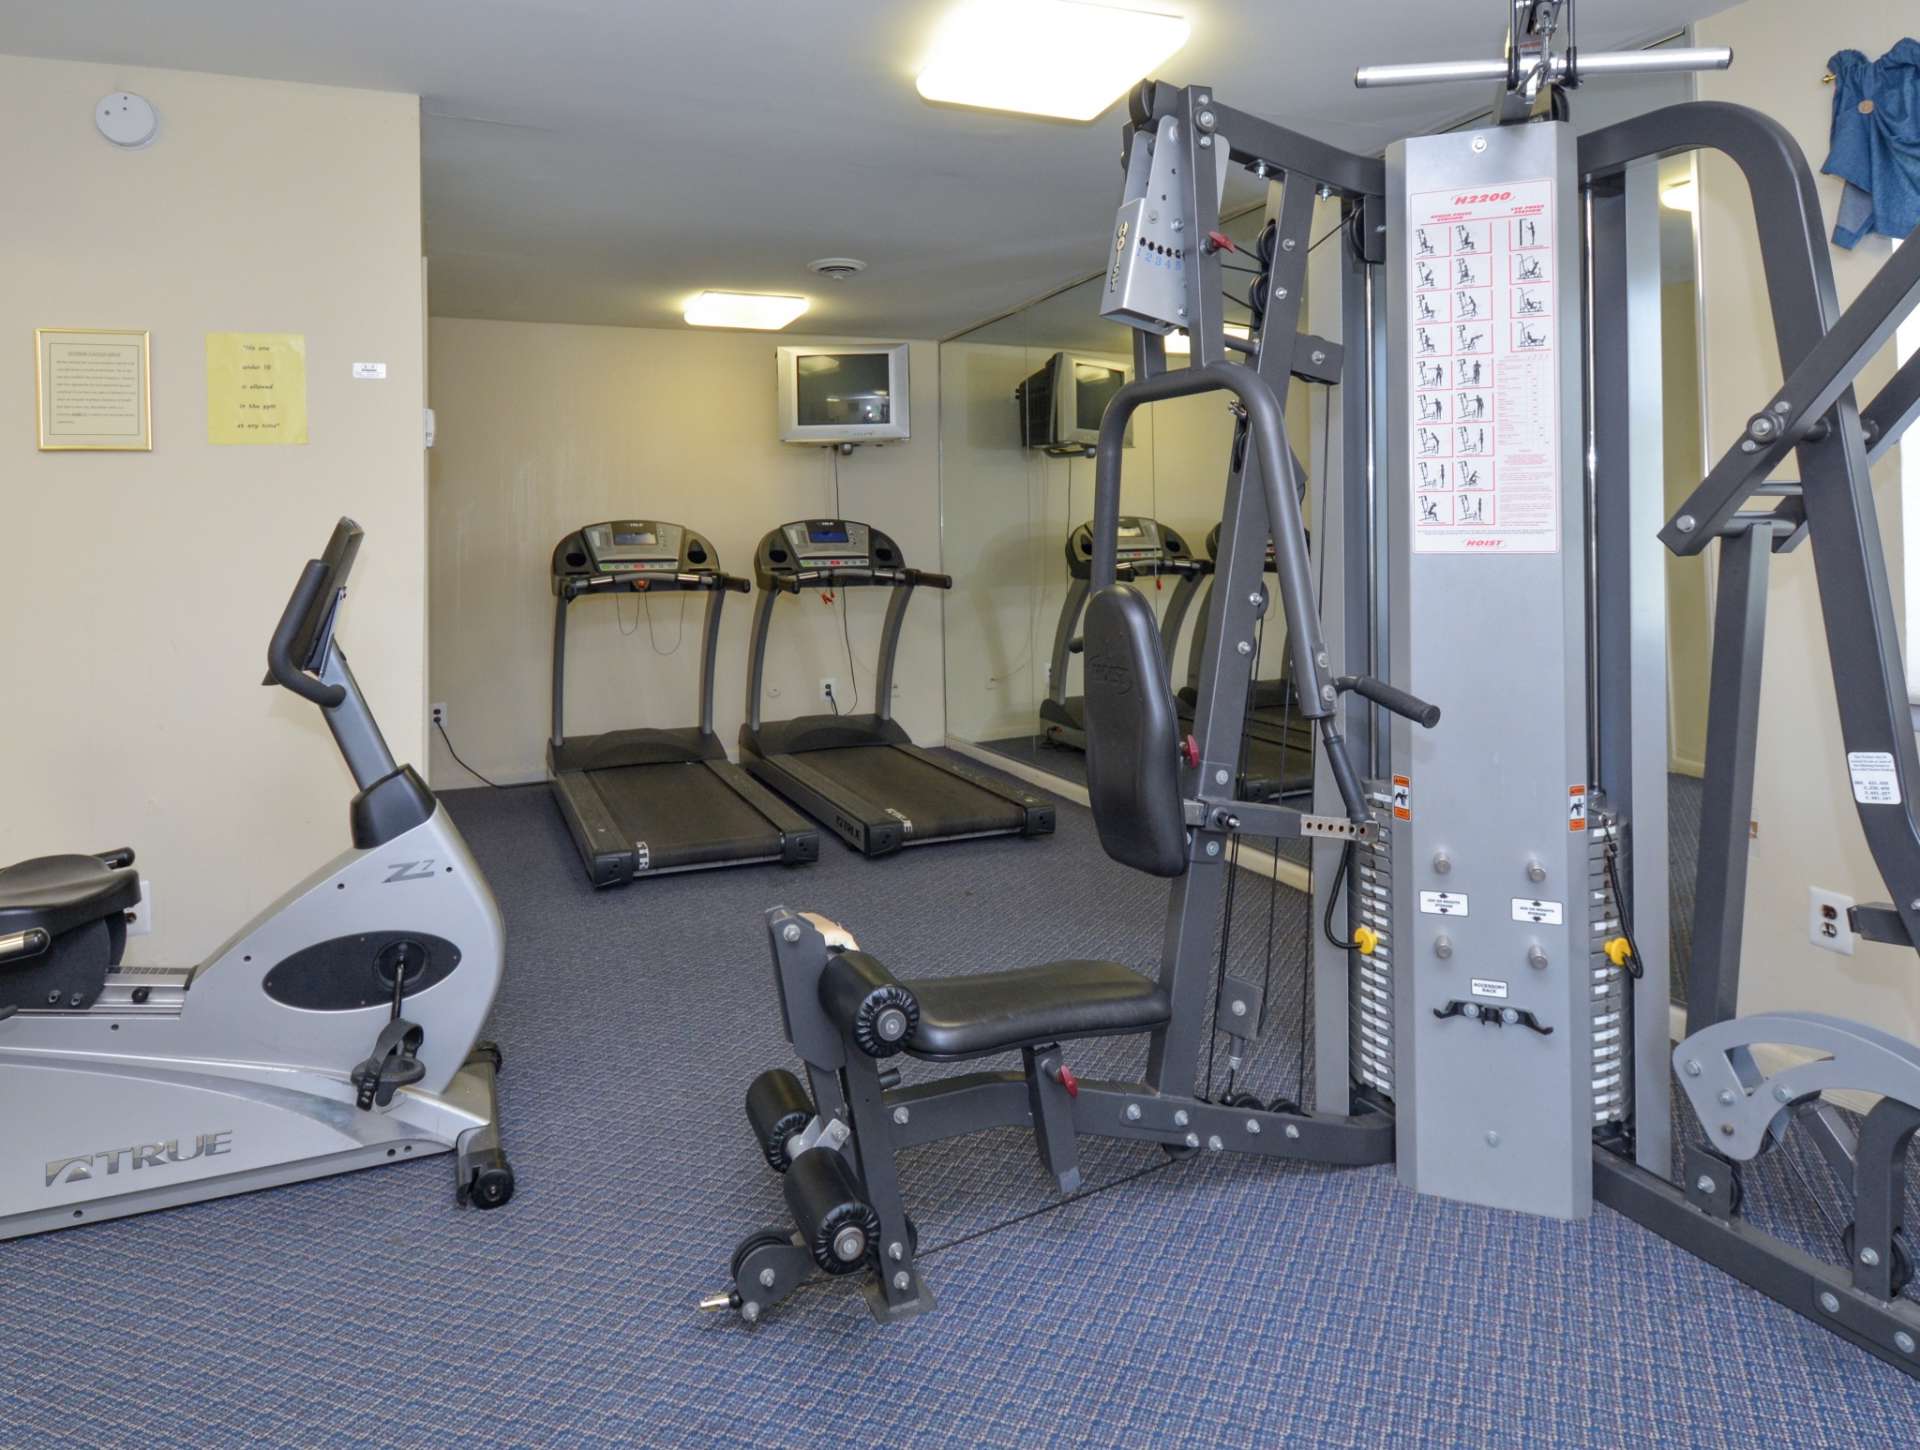 Indoor gym with multiple mirrors and a variety of workout equipment.